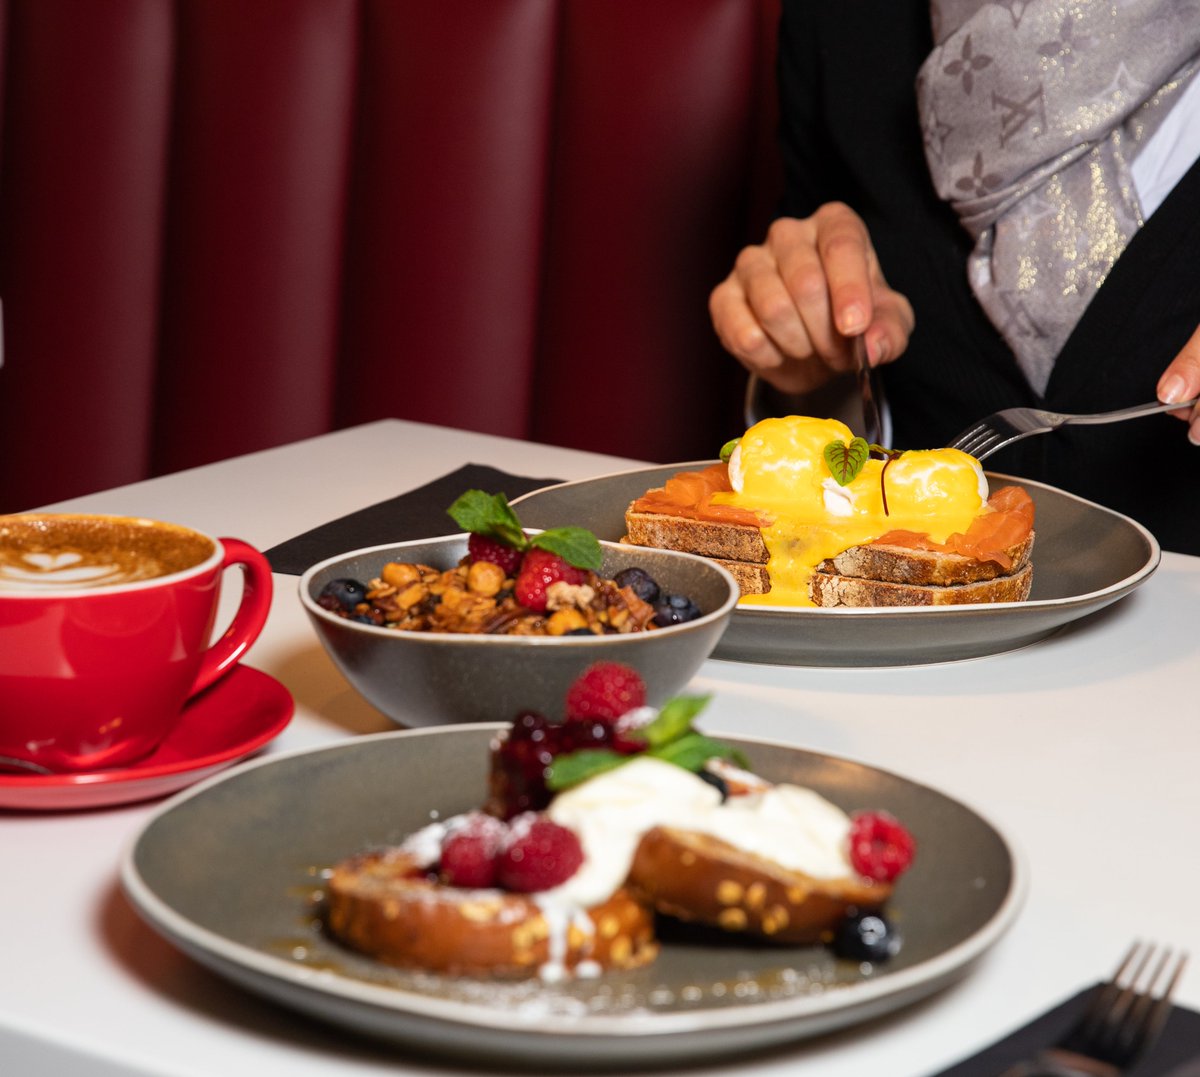 Mother’s Day plans? 🌸 Look no further! Treat yourself or your Mum to our delicious brunch this Mother’s Day at Kensington Quarter. Click the link in our bio or call 020 7799 4999 to make a reservation ✨